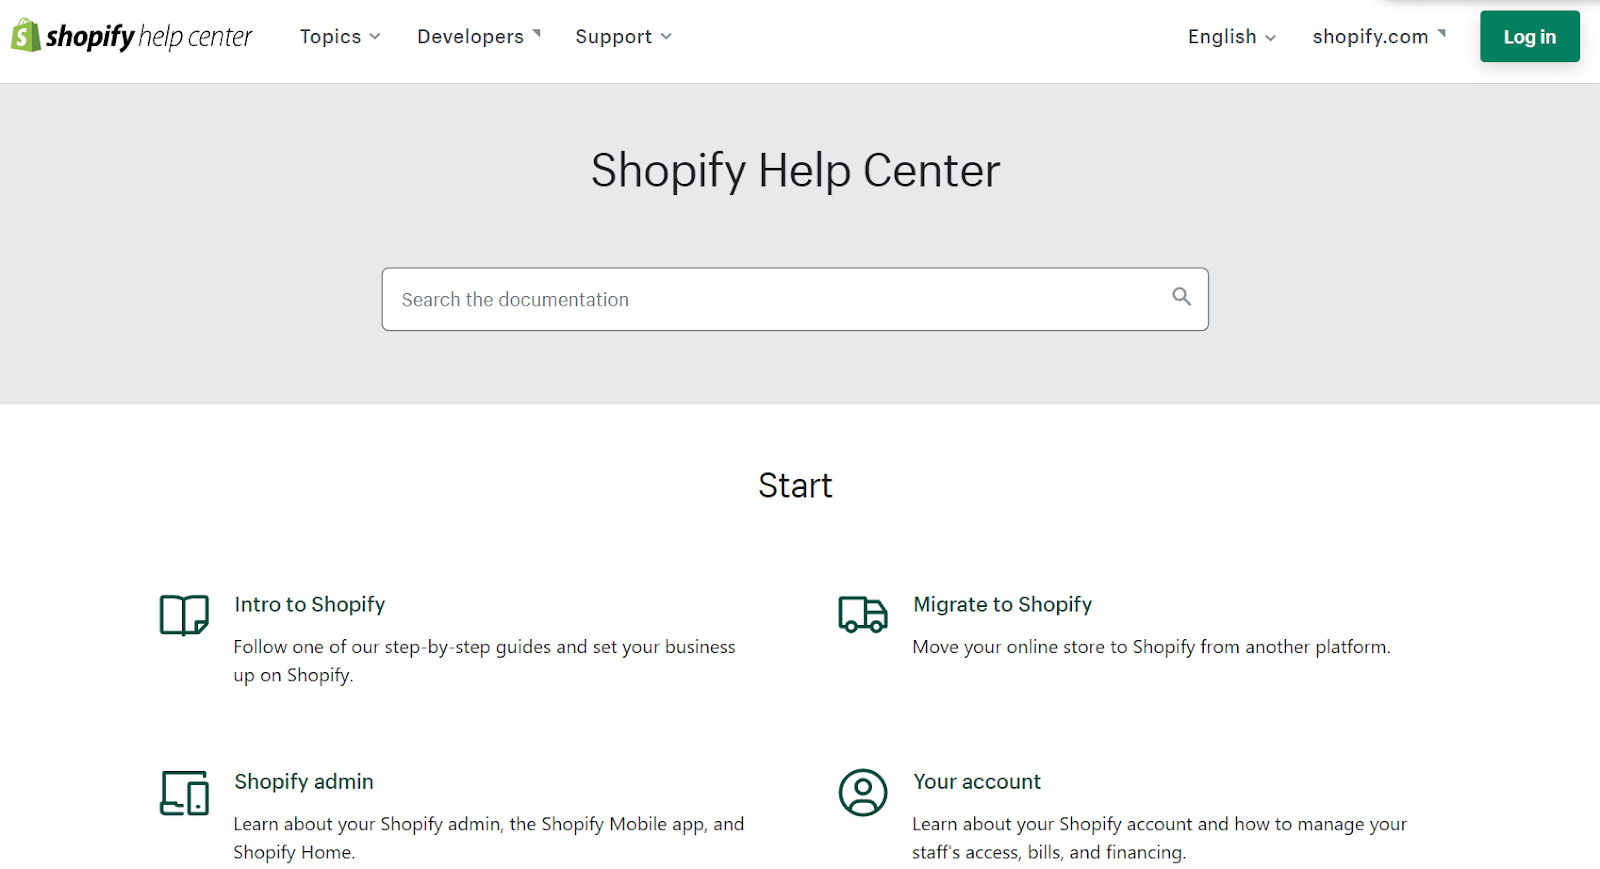 The Shopify customer support center is excellent.